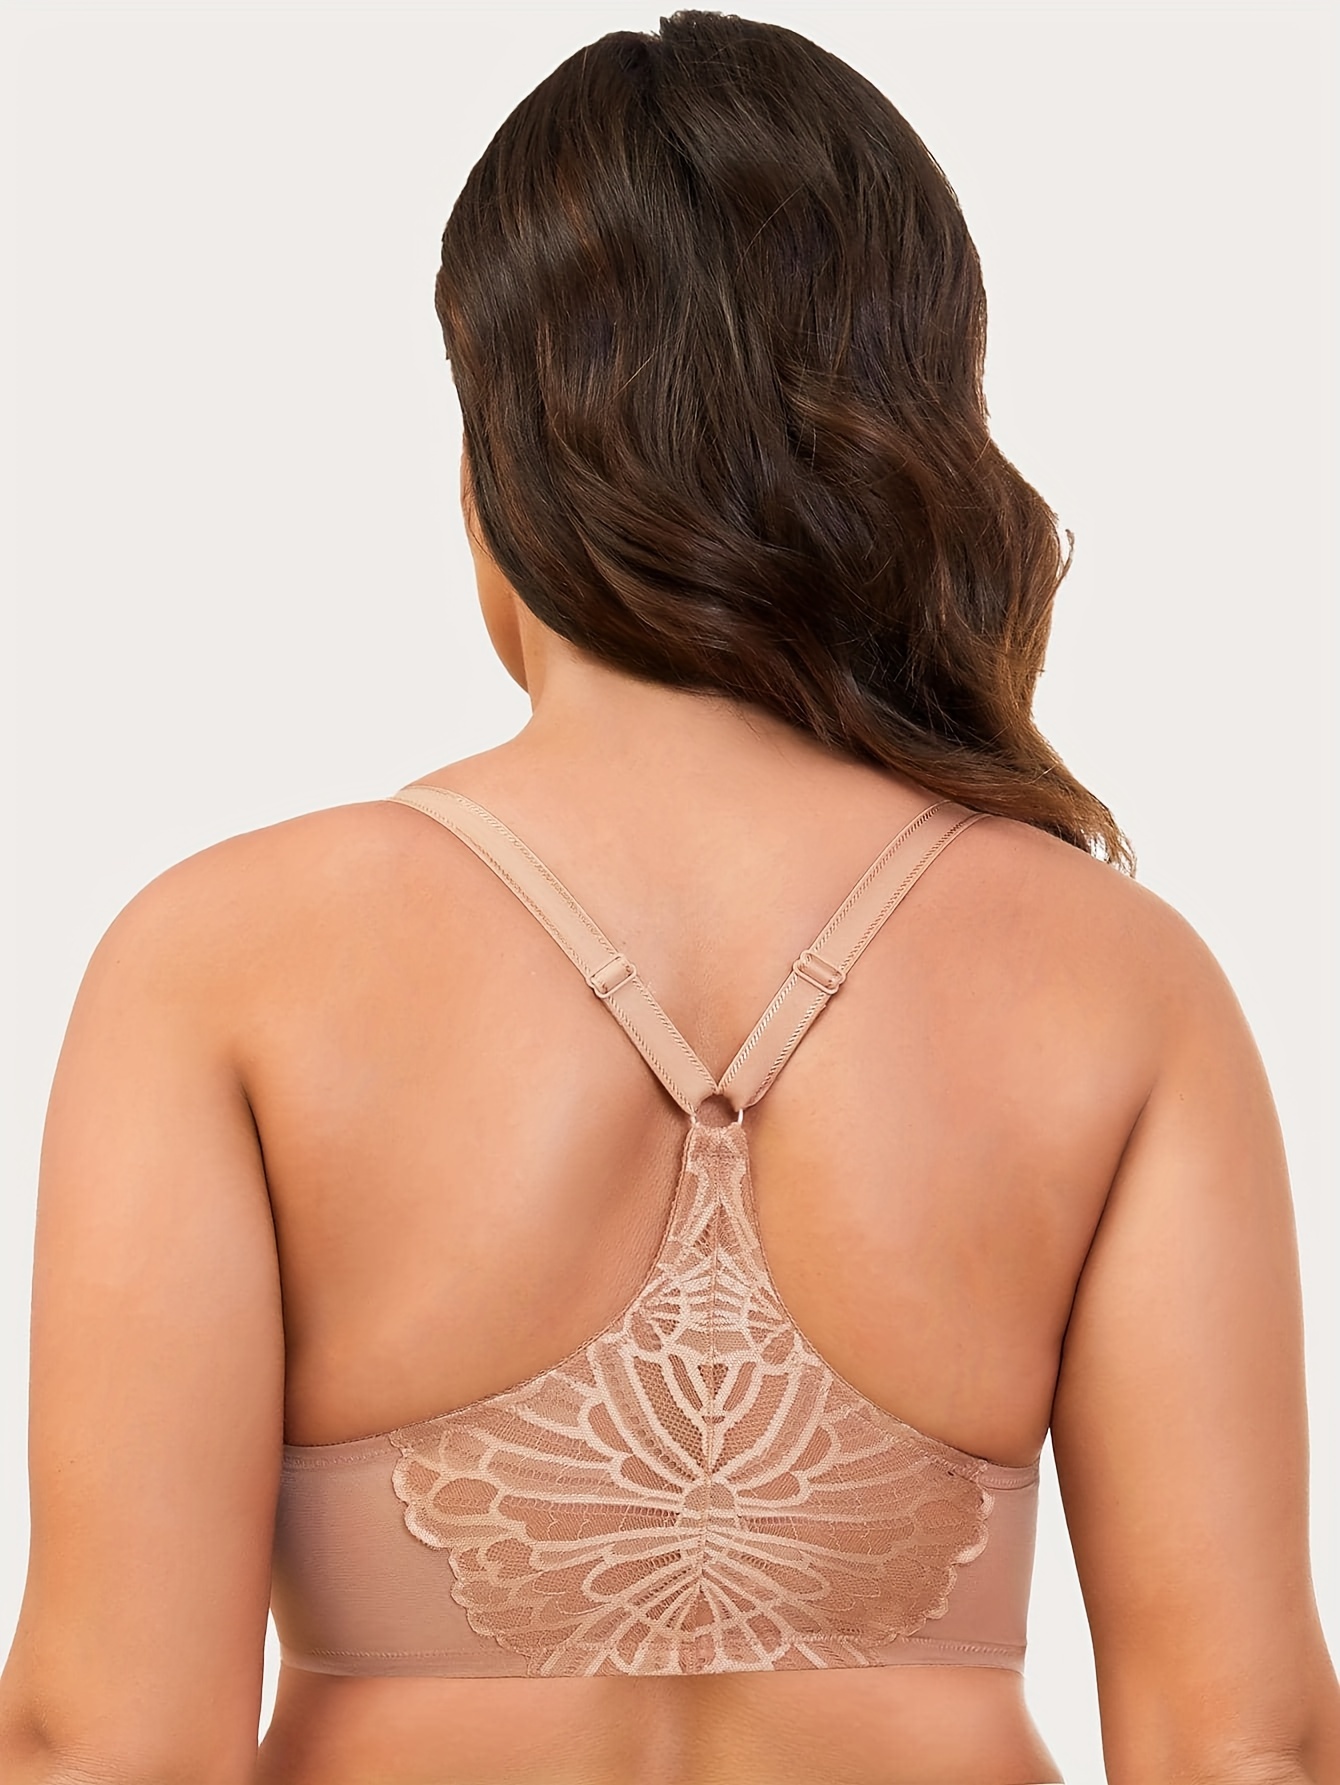 MELENECA Front Closure Bras for Women Sexy Lace Plus Size